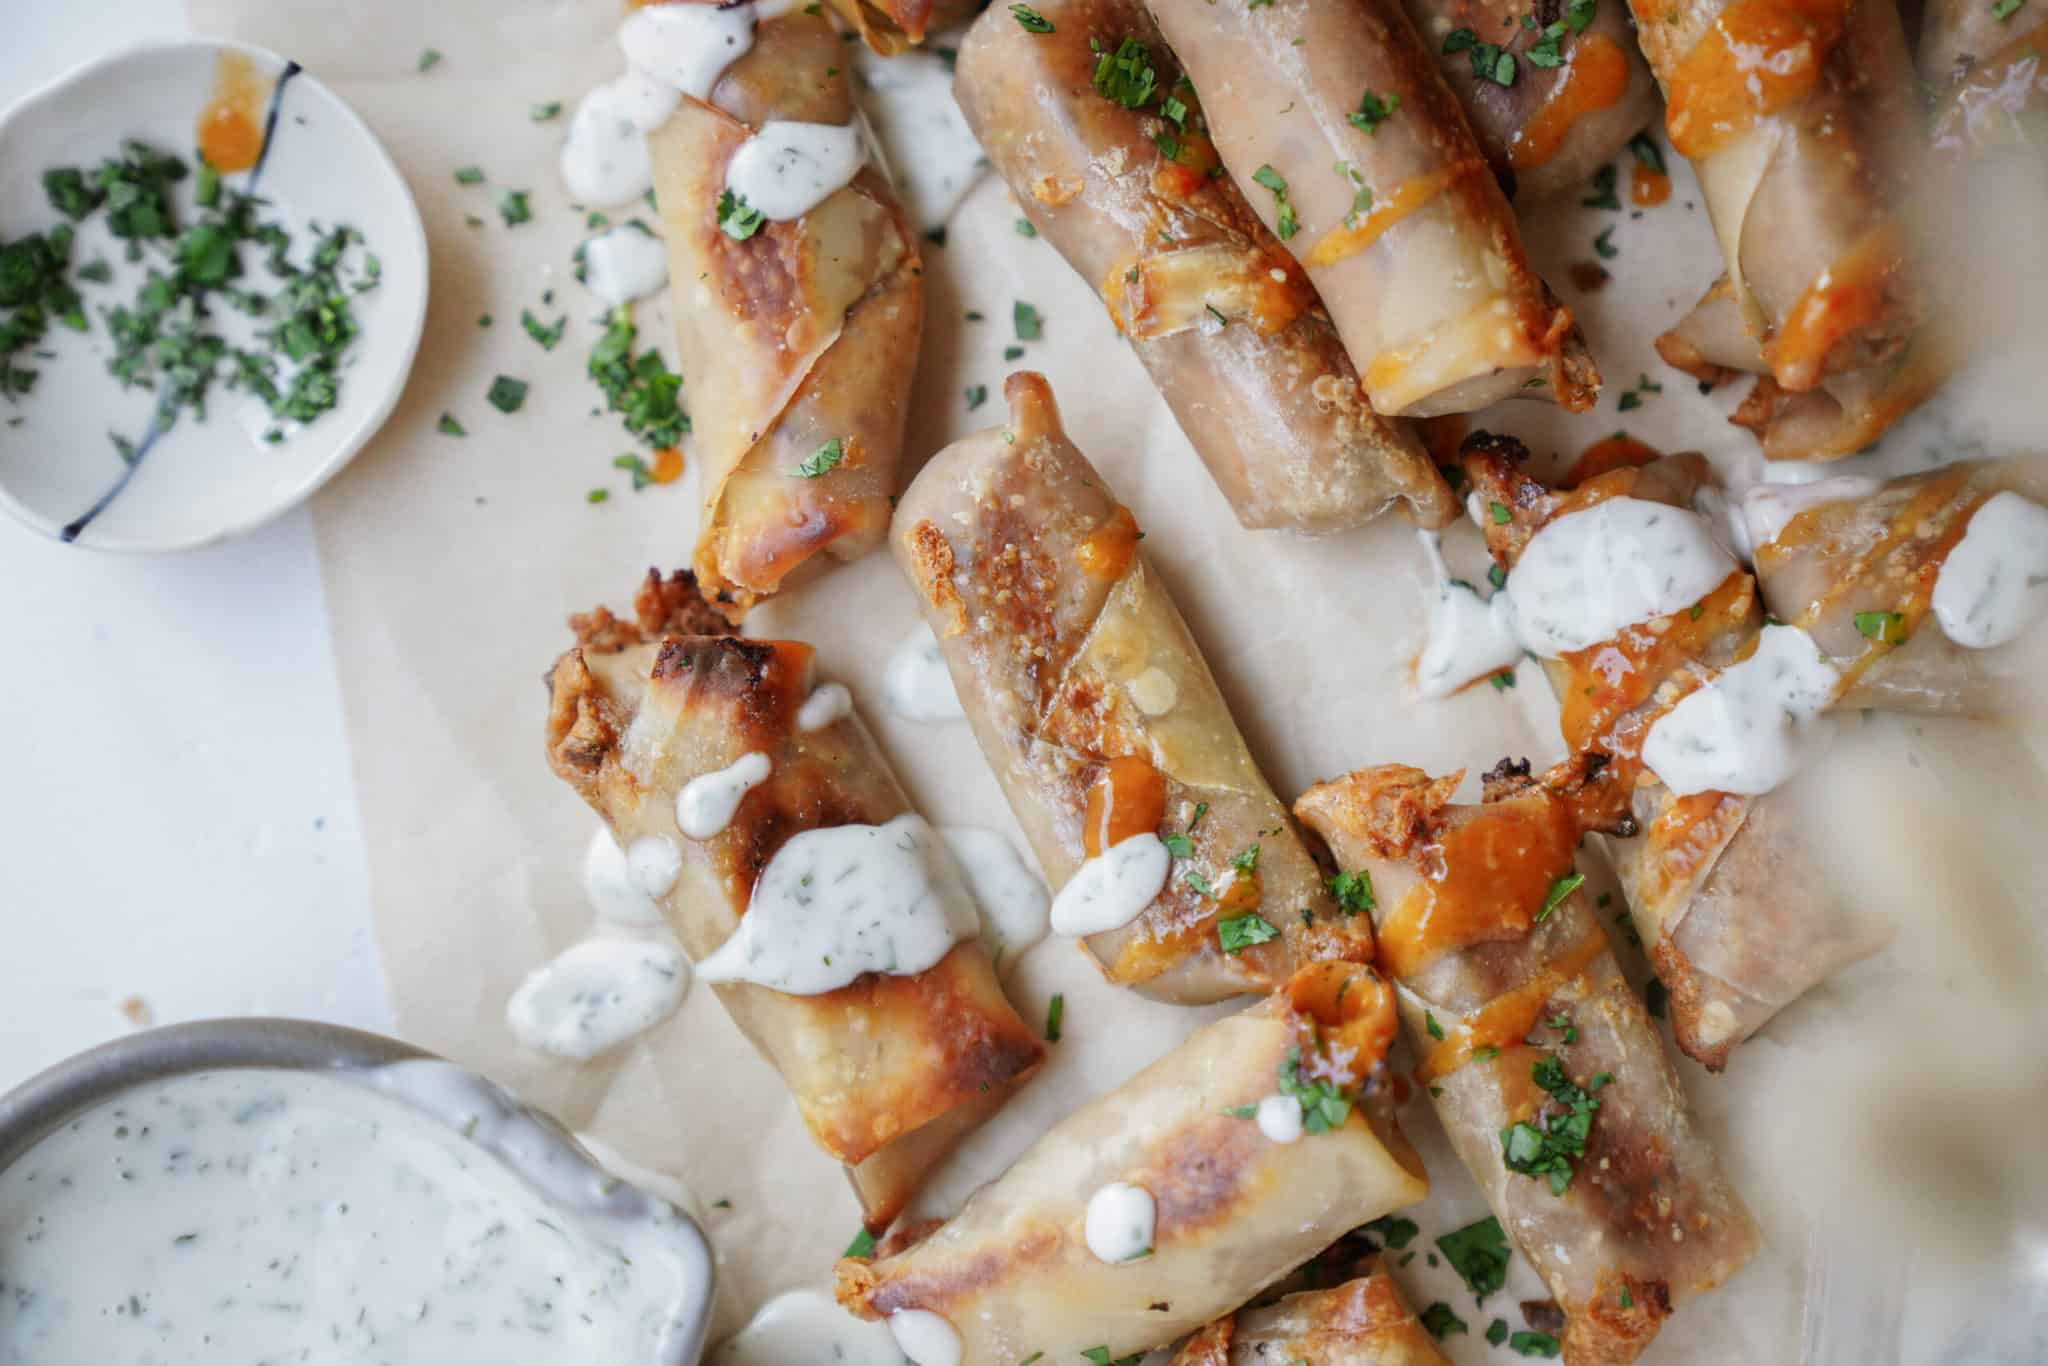 Egg roll recipe on countertop drizzled with ranch sauce